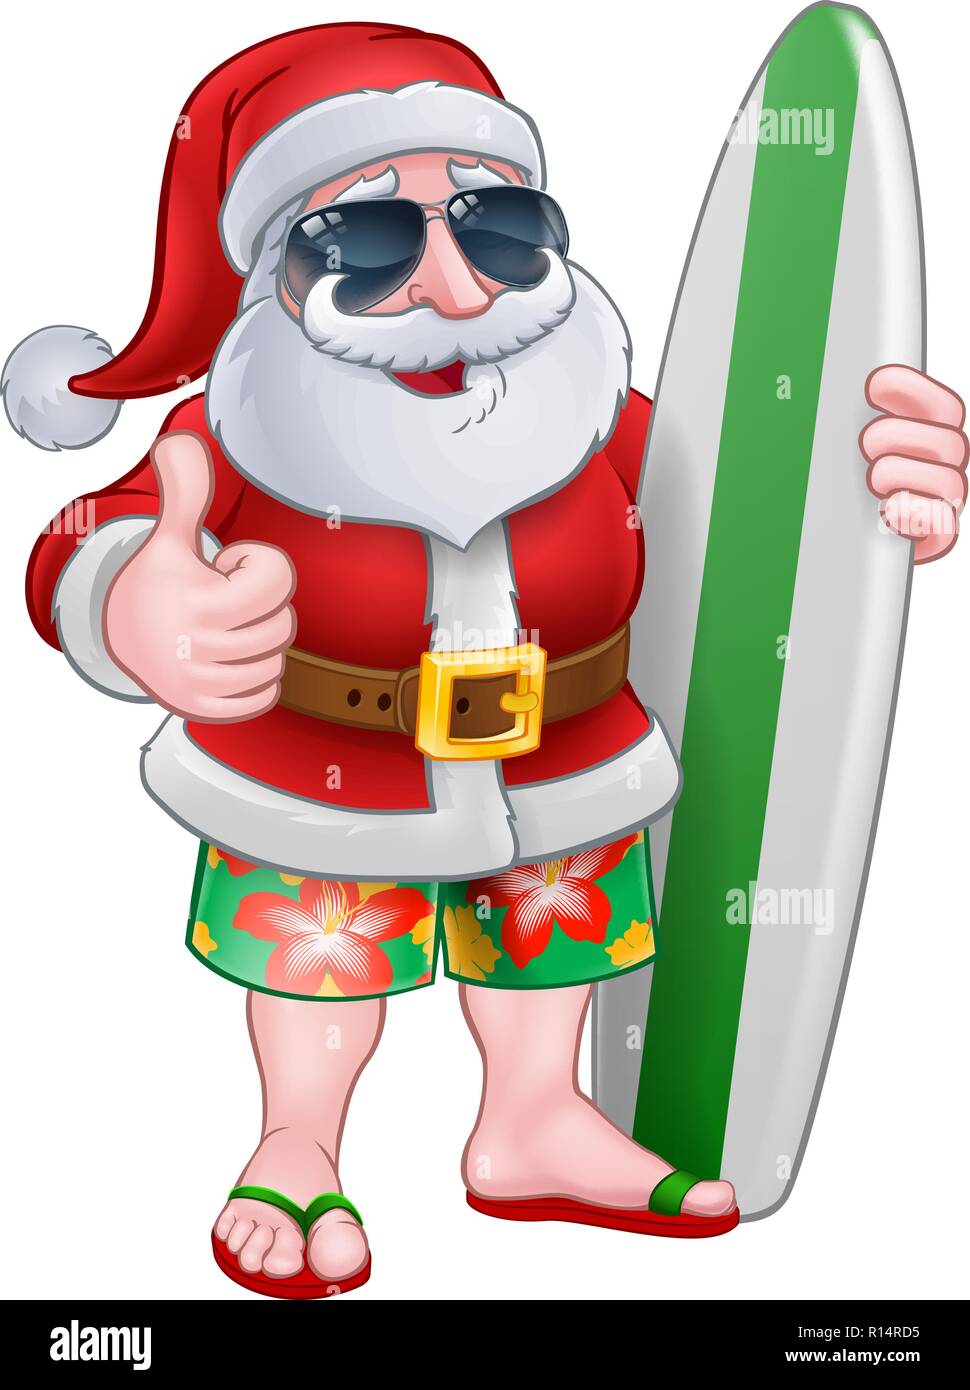 Cool Santa With Surfboard and Sunglasses Cartoon Stock Vector